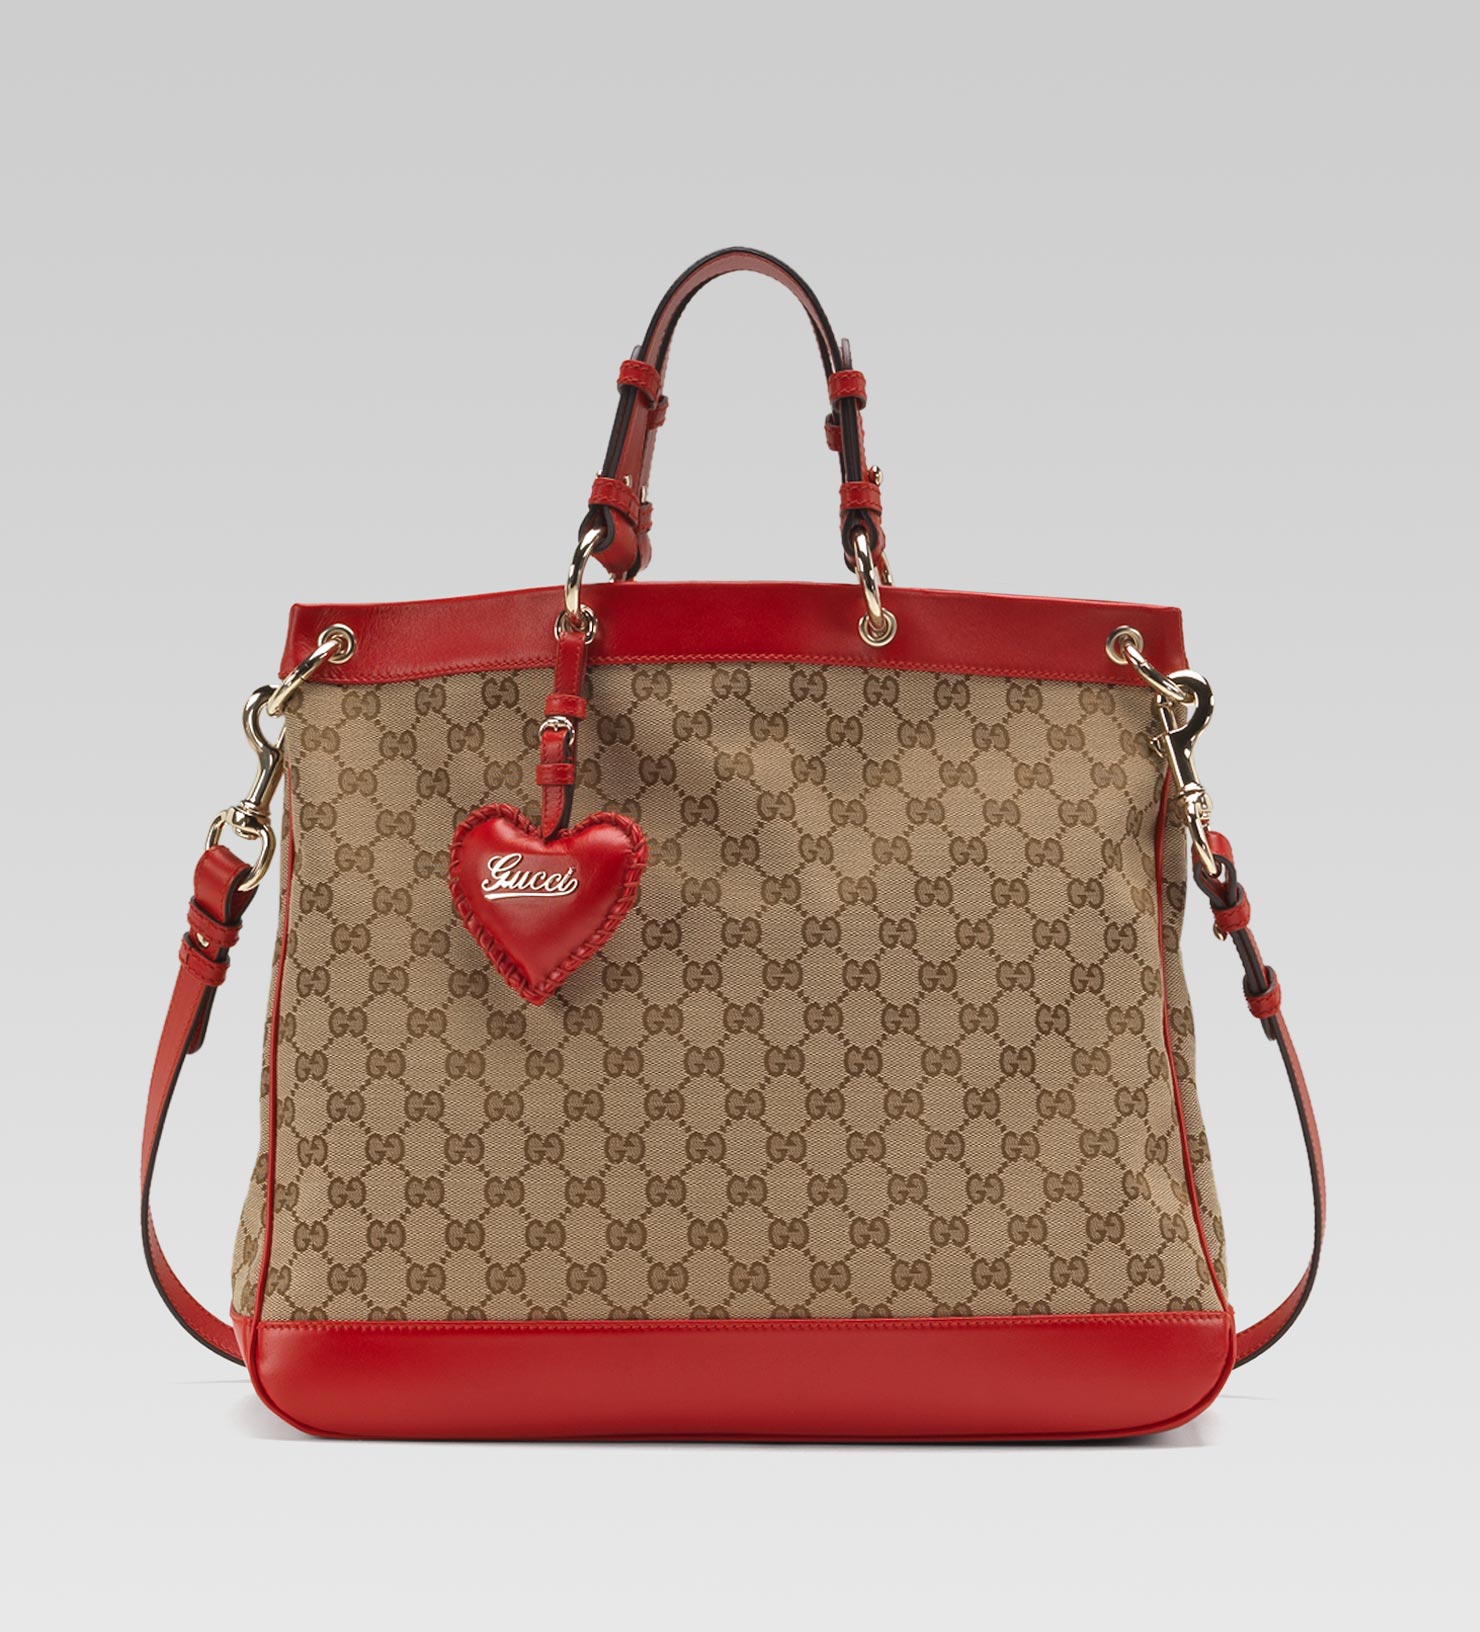 Lyst - Gucci Valentine Bag with Hand Stitched Heartshaped Leather Charm and Gucci Script Logo in ...